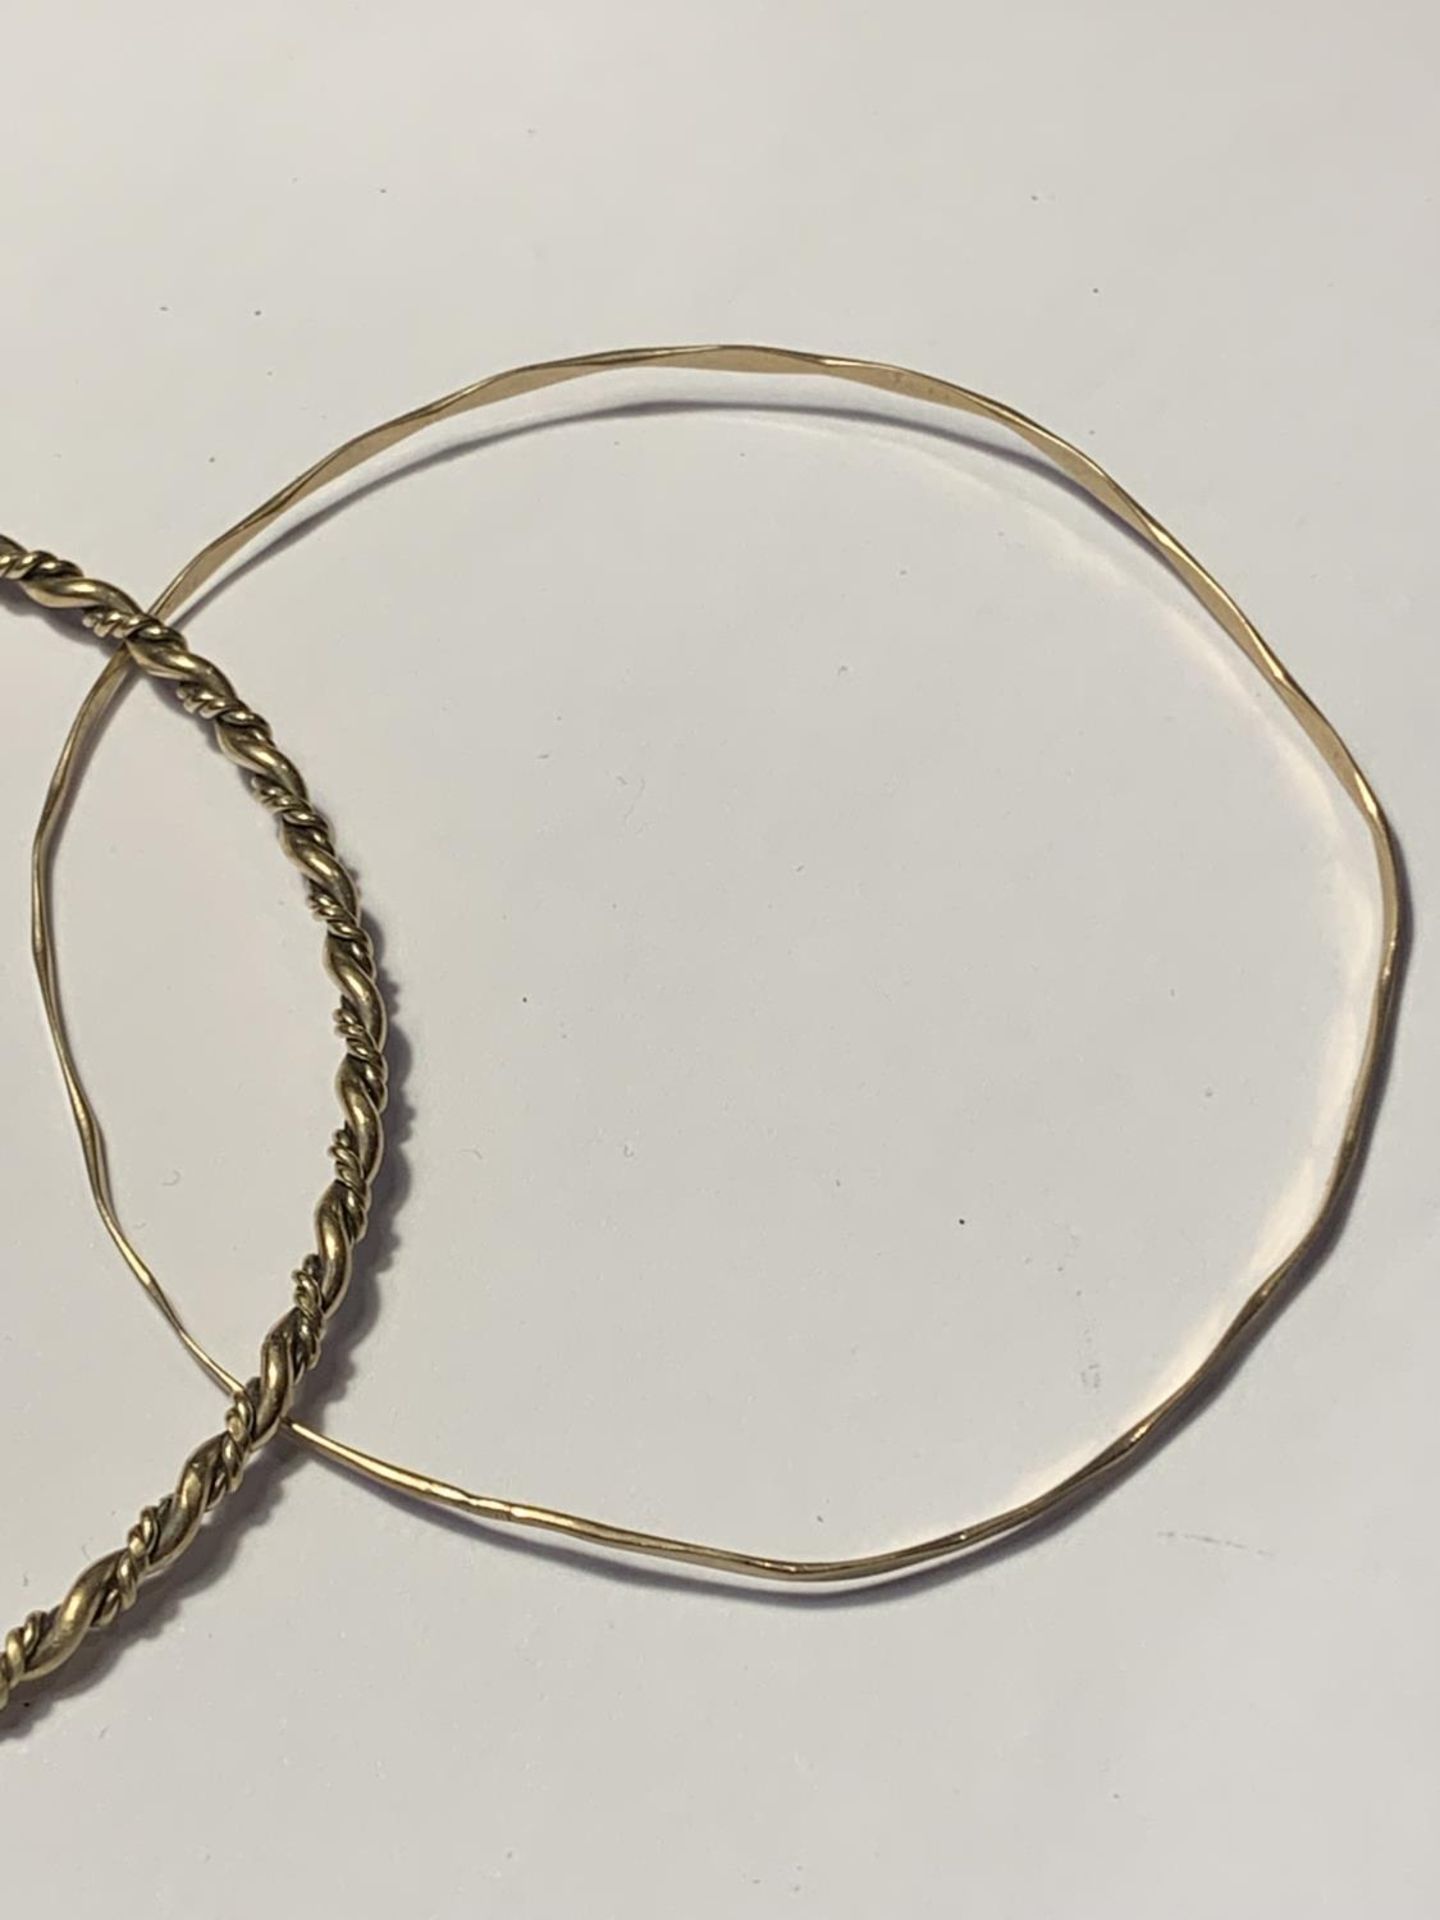 THREE TESTED TO 9 CARAT GOLD BANGLES GROSS WEIGHT 13.07 GRAMS - Image 4 of 4